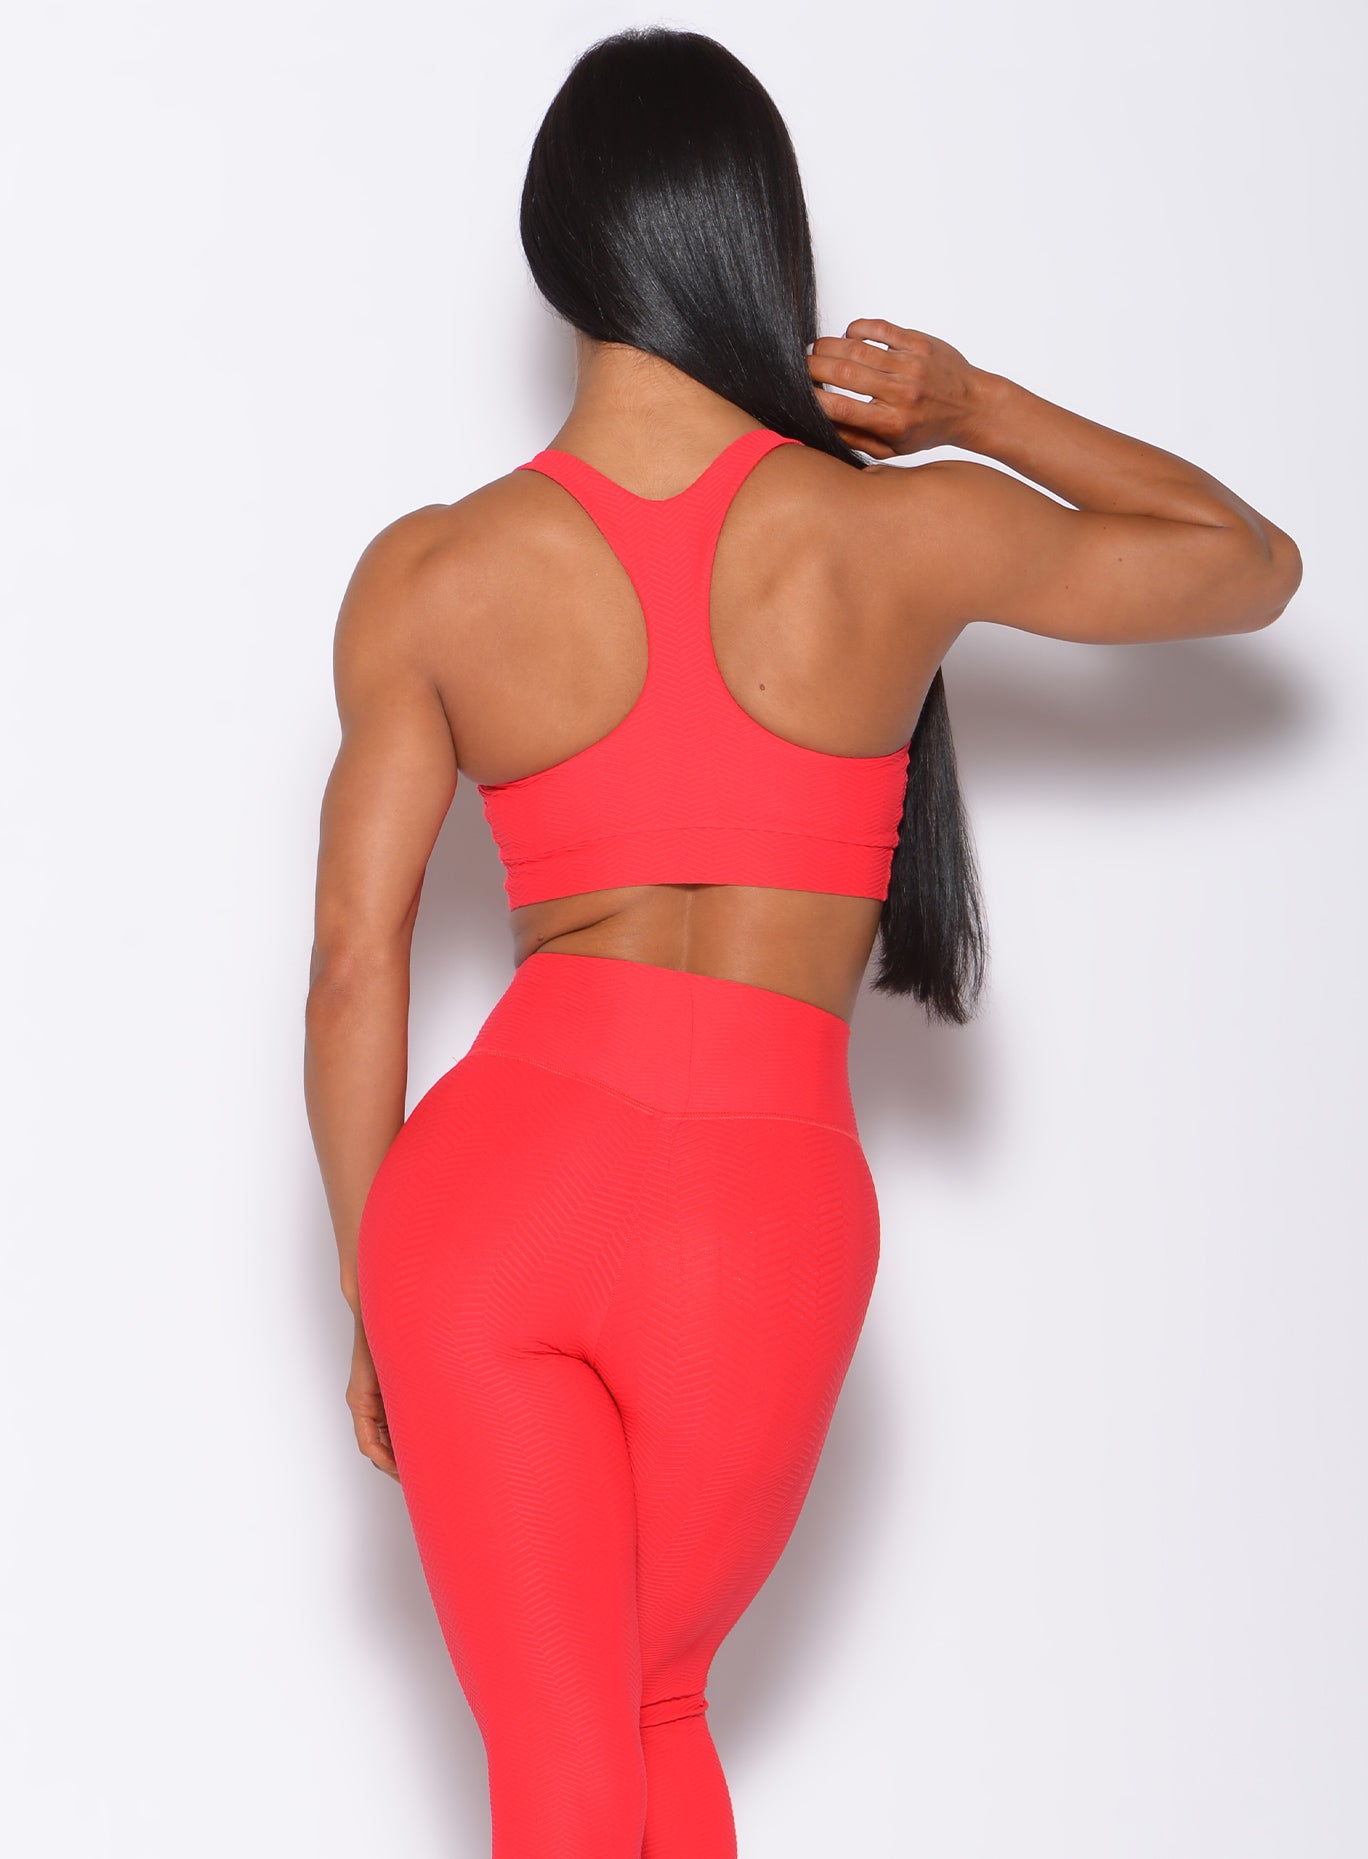 Front profile view of a model with her hands on waist wearing our chevron sports bra in flame red color and a matching leggings